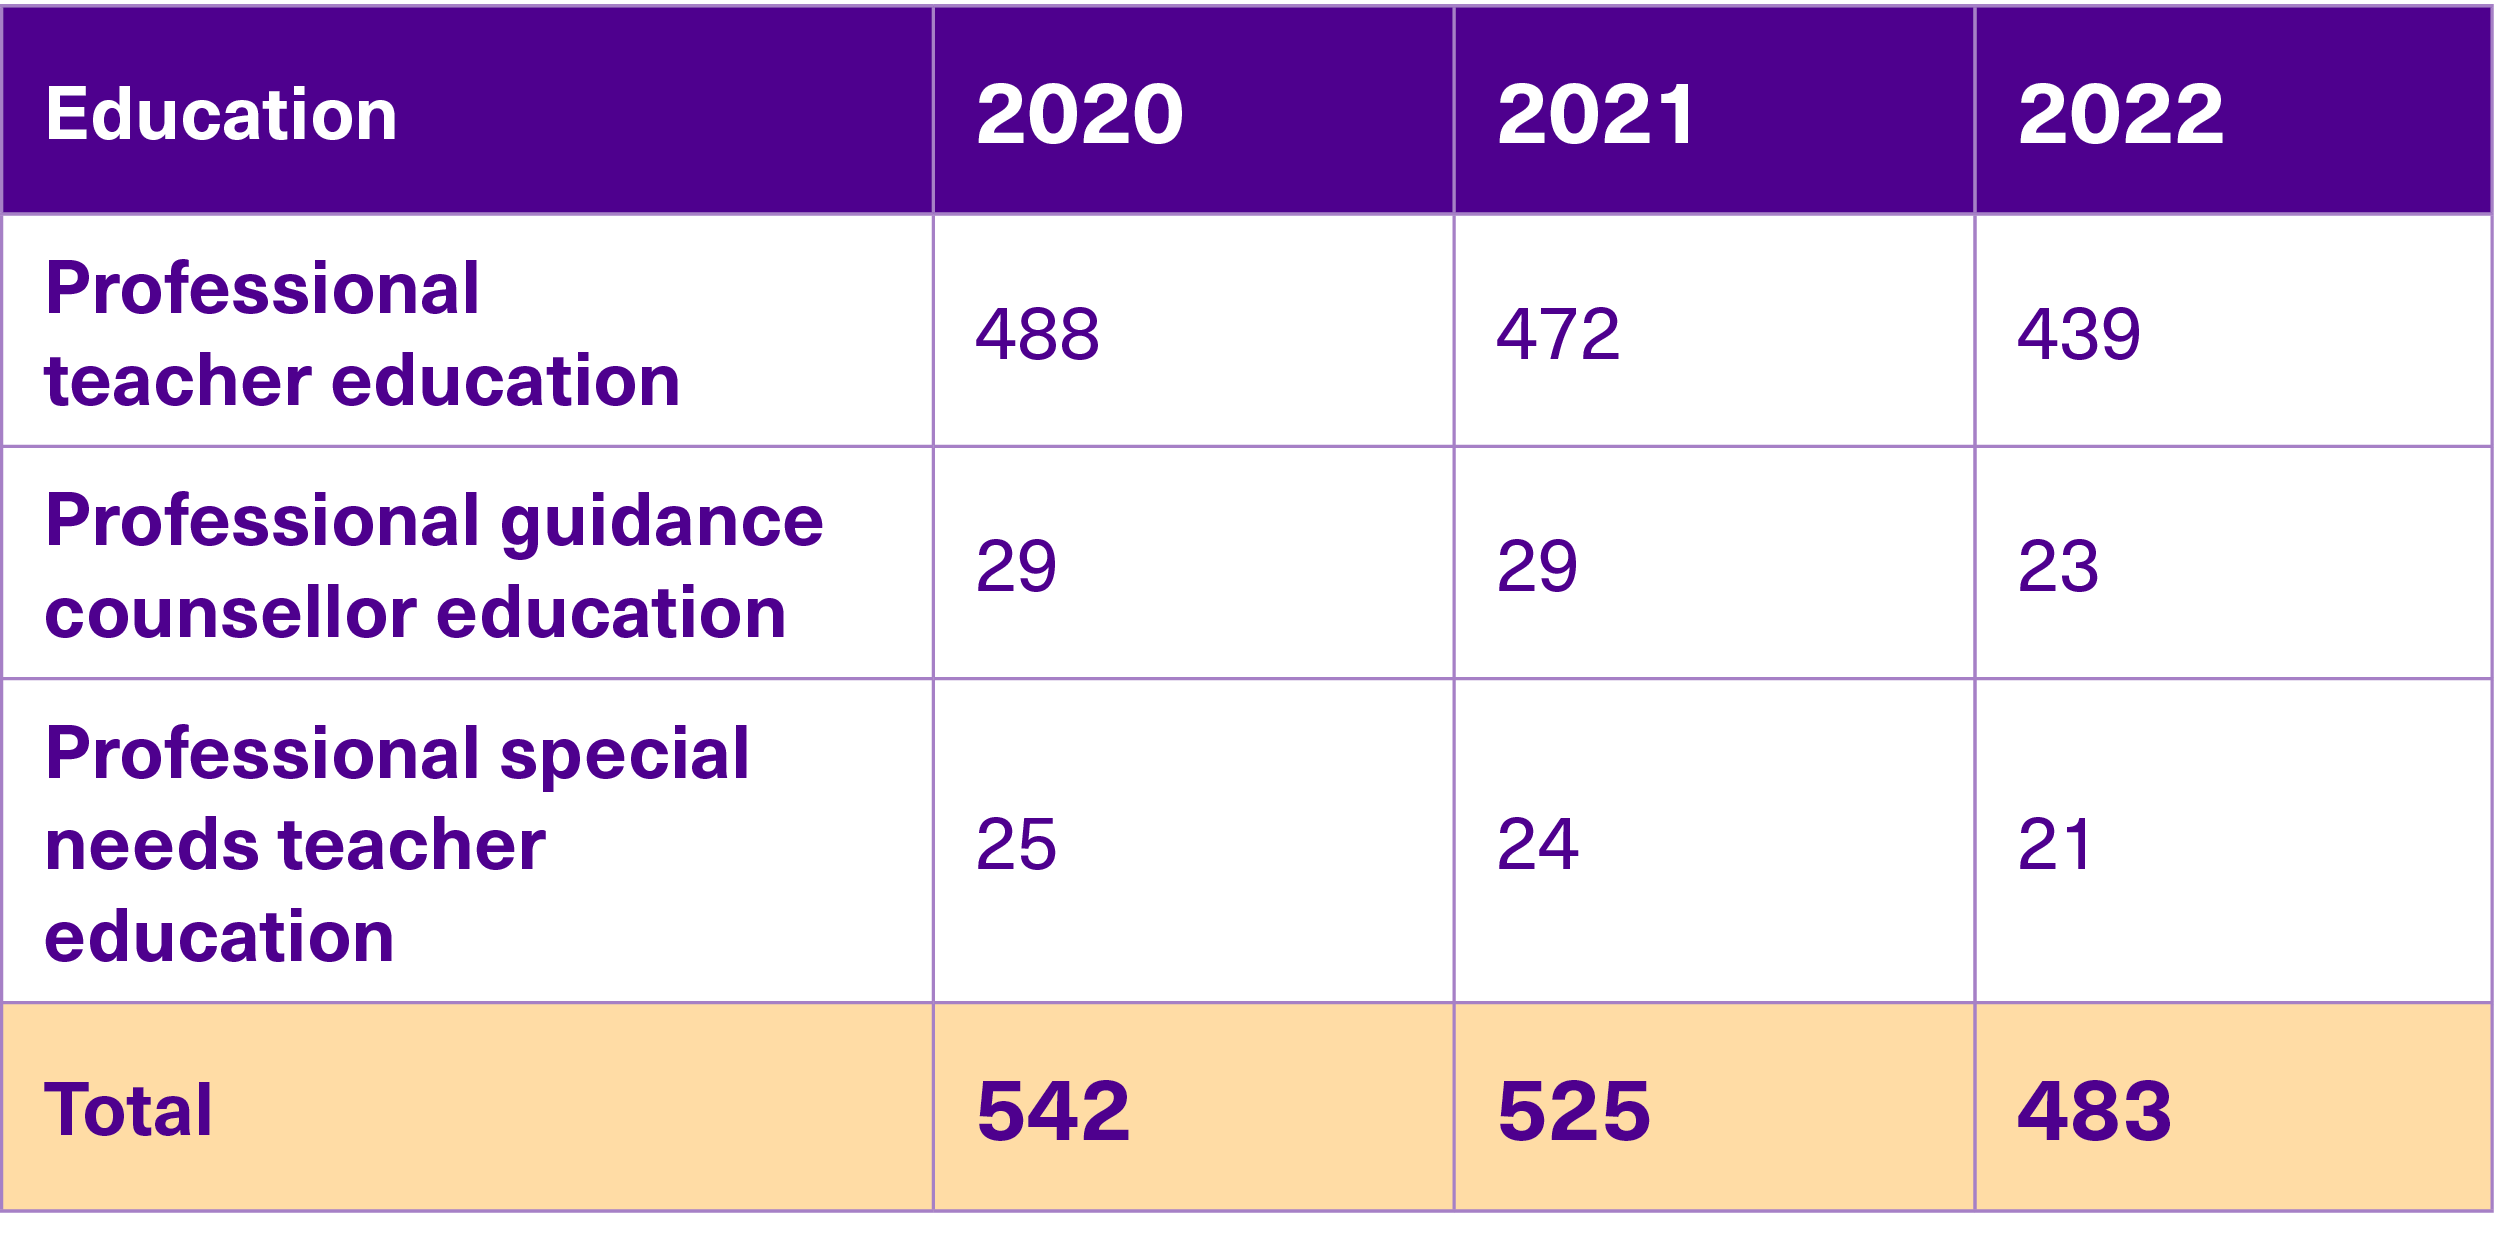 Table of professional teacher education students 2020-2022